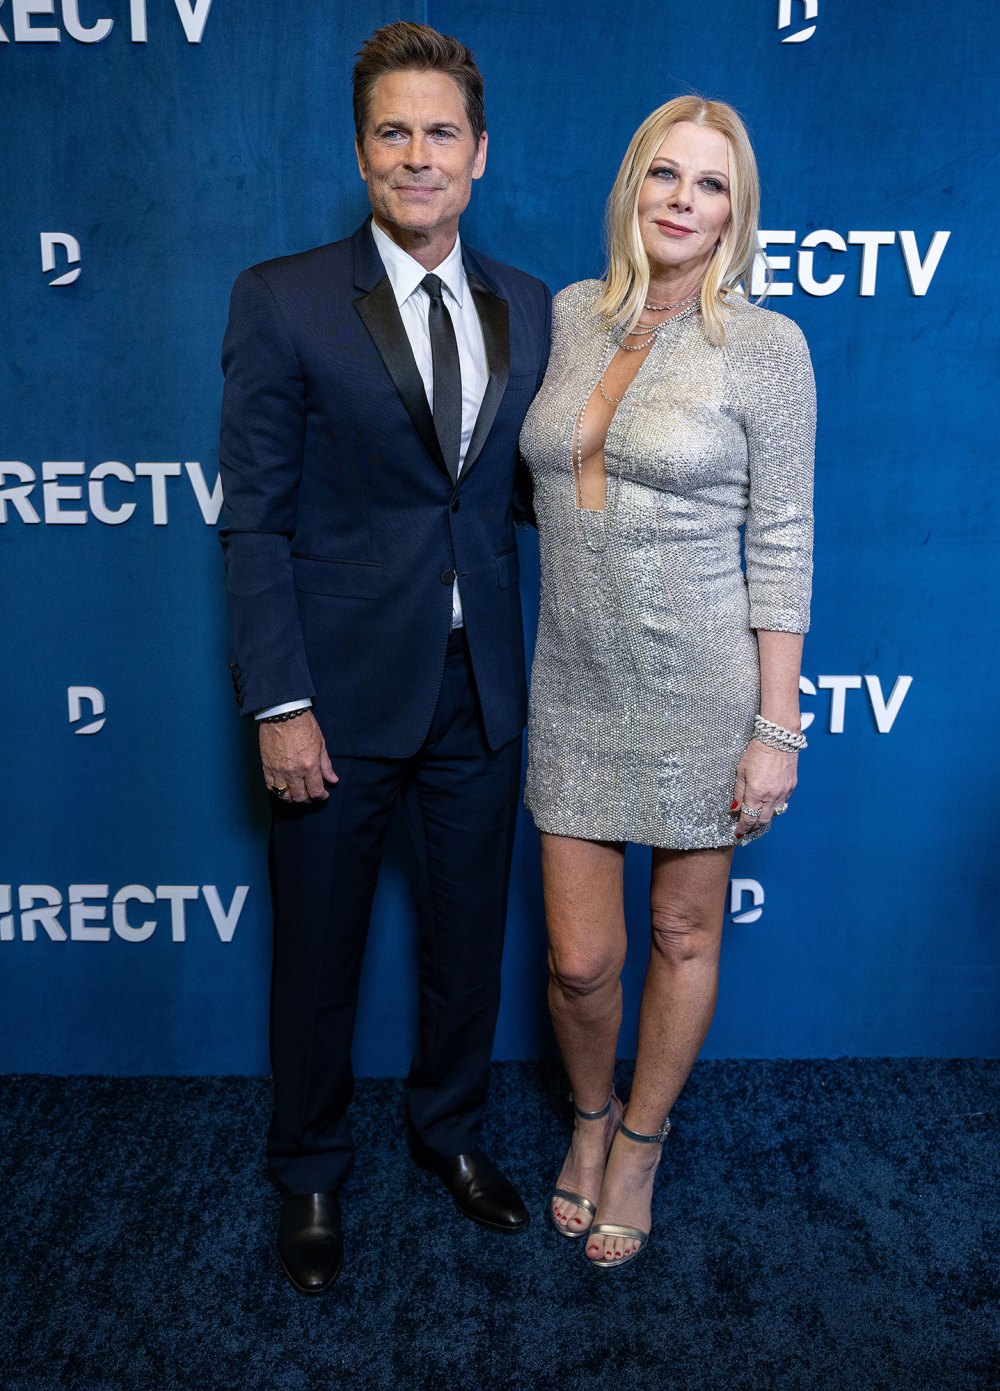 Rob Lowe and Sheryl Berkoff Inside DIRECTV Oscars Party Reality TV Reunions to Rob Lowe Birthday